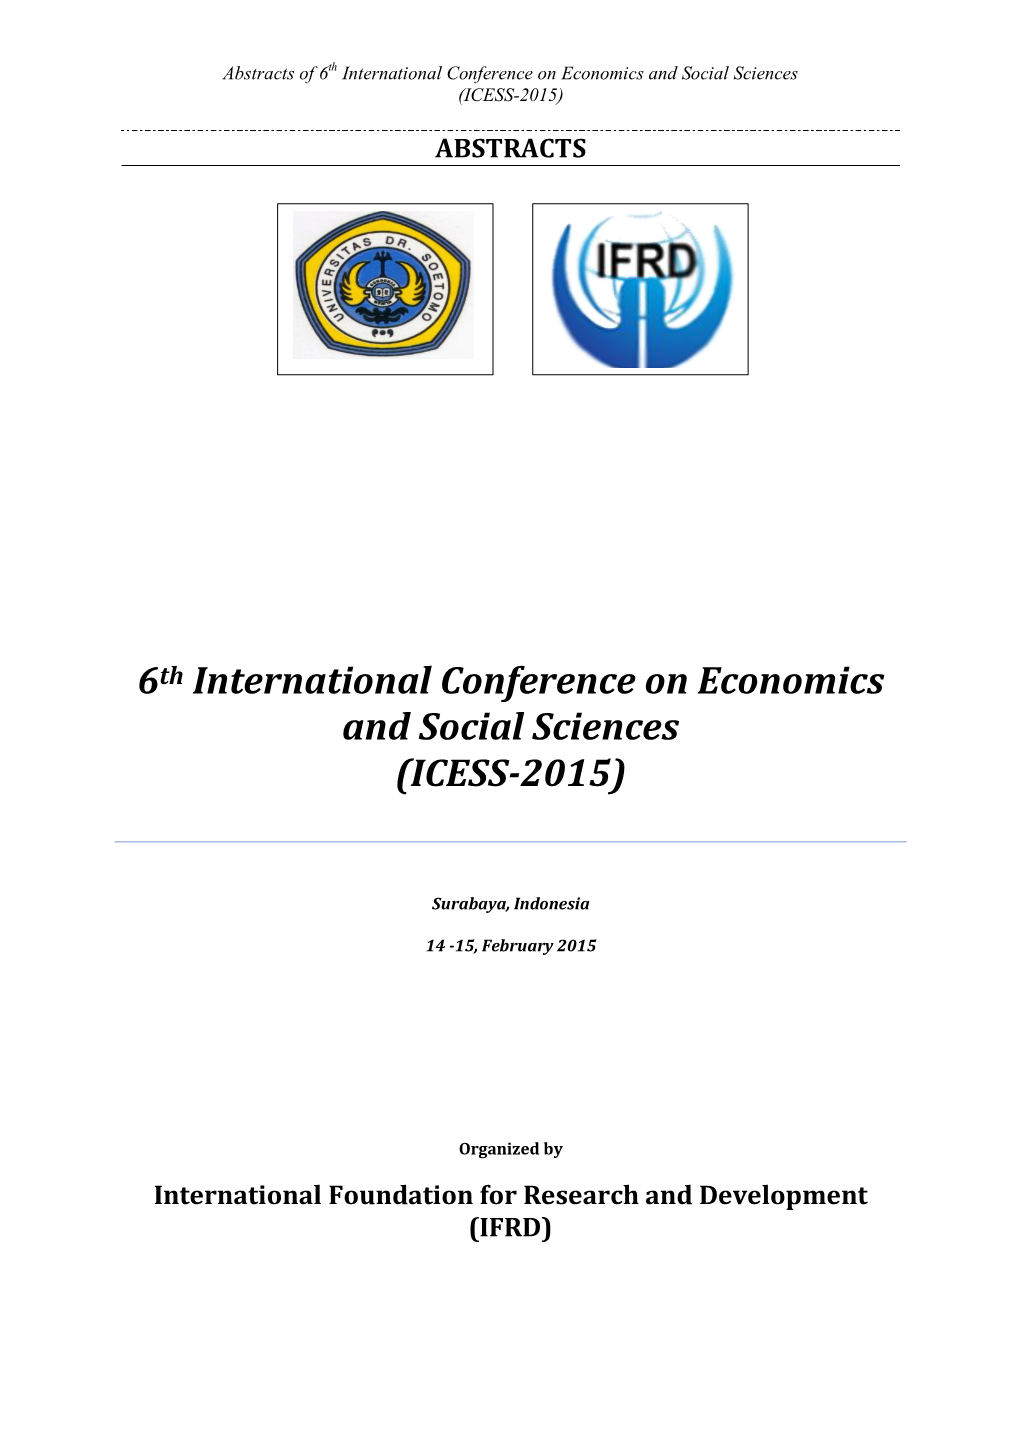 6Th International Conference on Economics and Social Sciences (ICESS-2015)